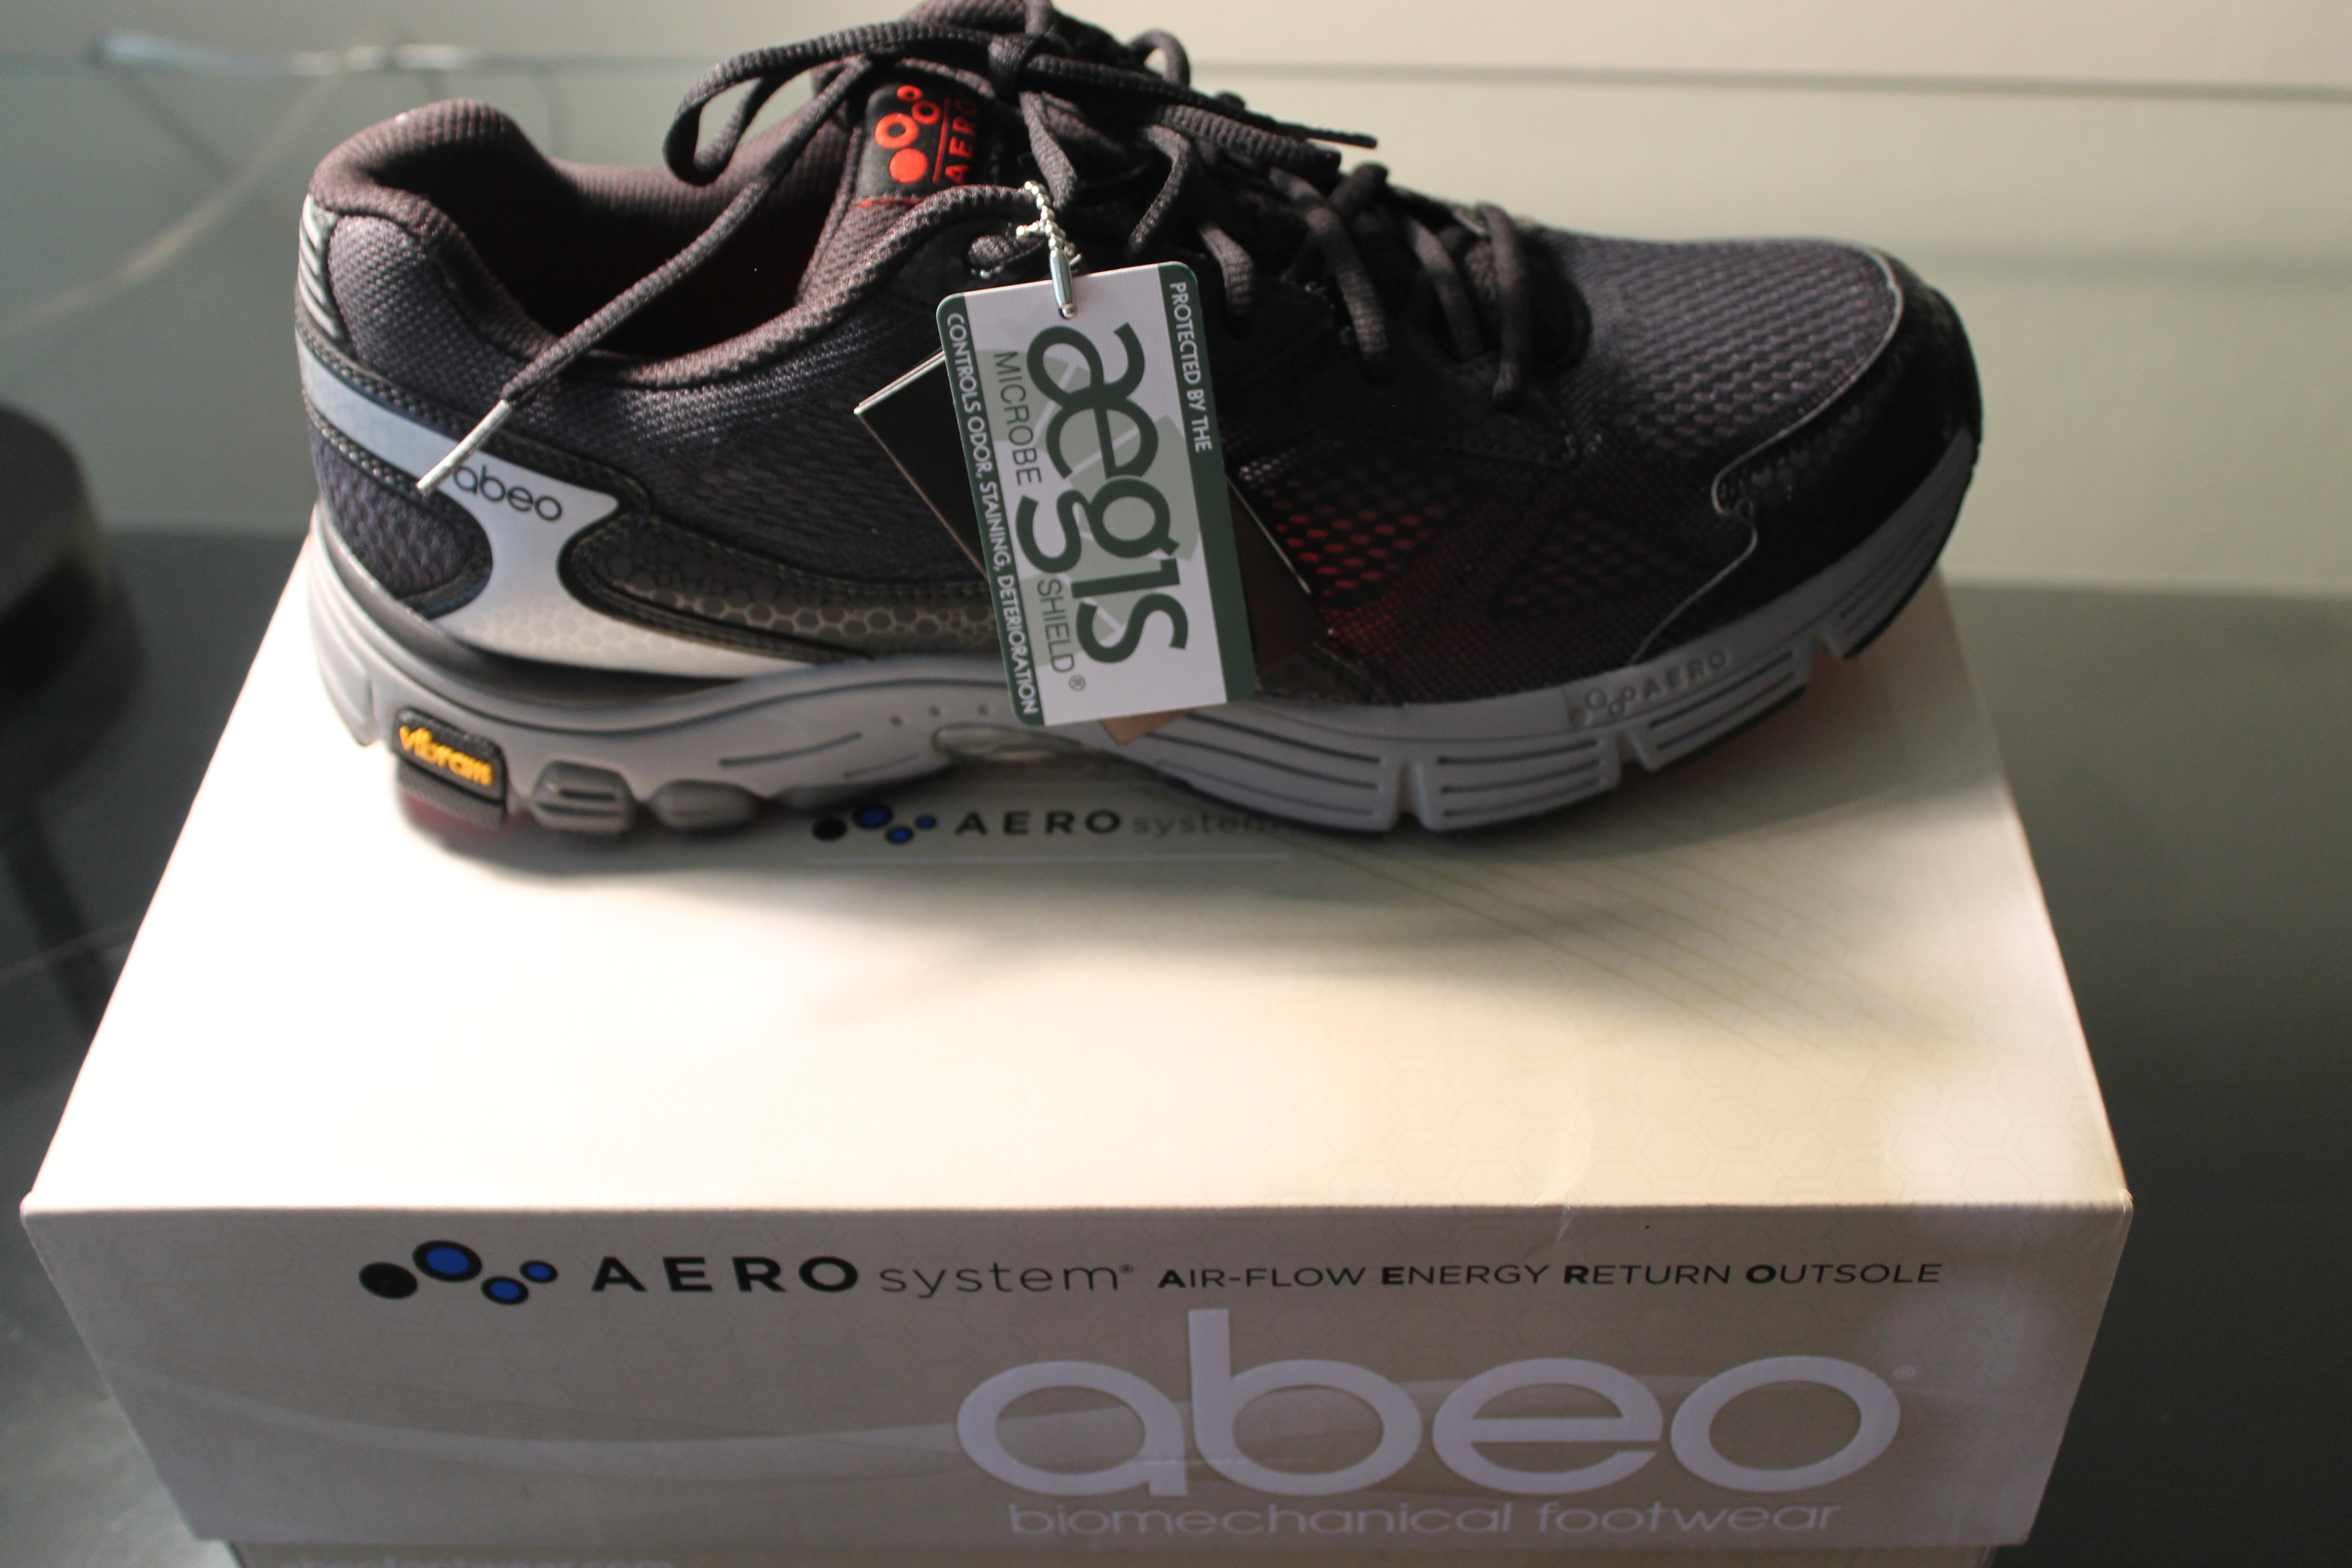 ABEO, shoes that will bring dad 